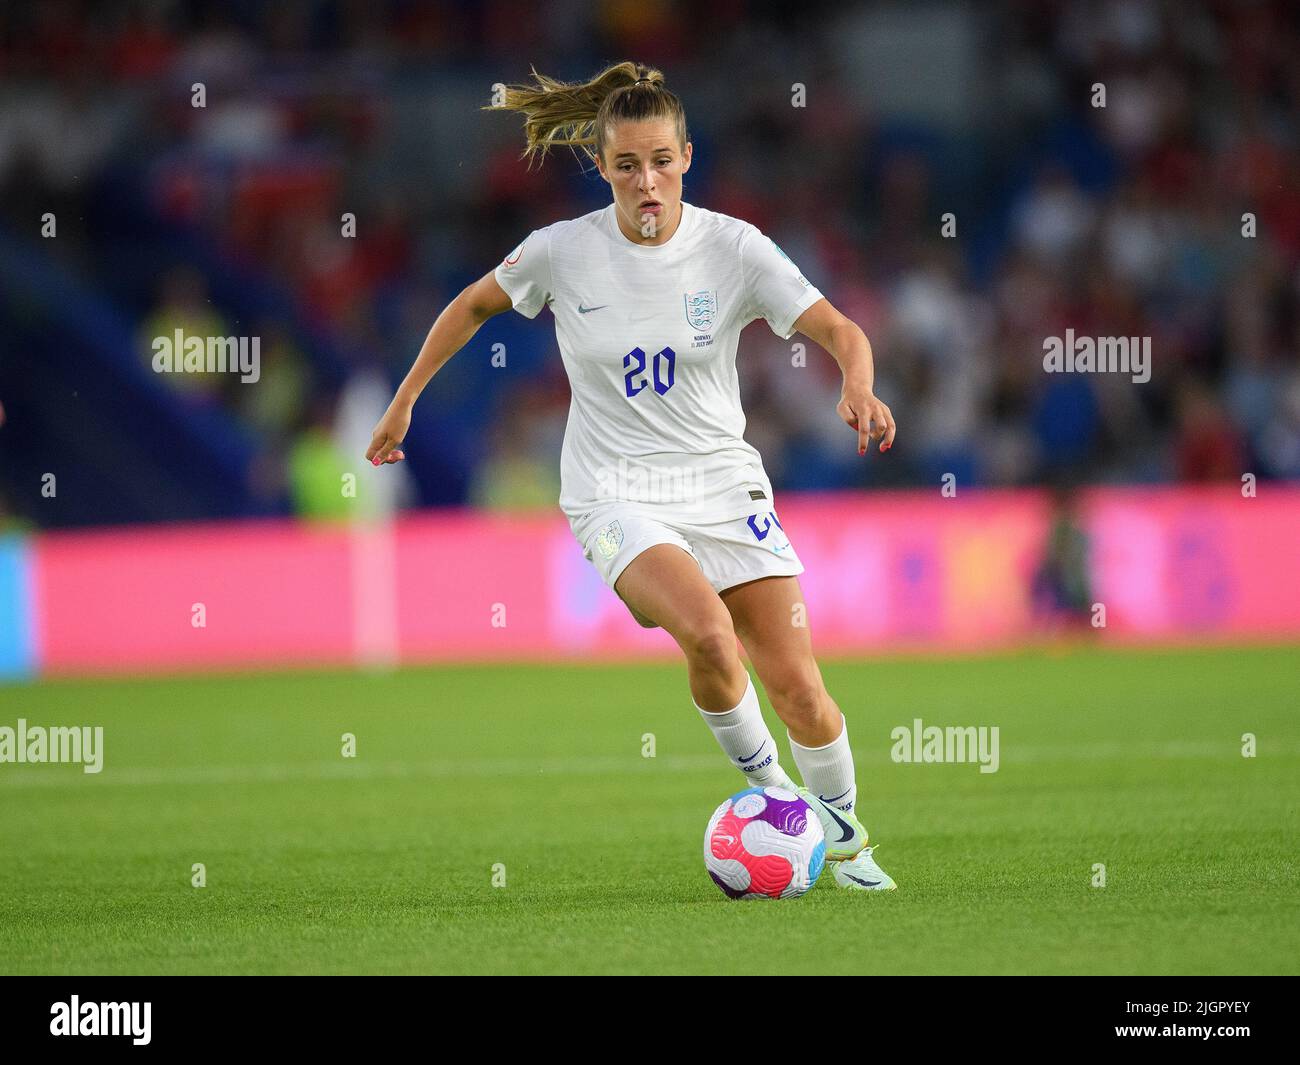 11 Jul 2022 - England v Norway - UEFA Women's Euro 2022 - Group A - Brighton & Hove Community Stadium  England's Ella Toone during the match against Norway.  Picture Credit : © Mark Pain / Alamy Live News Stock Photo